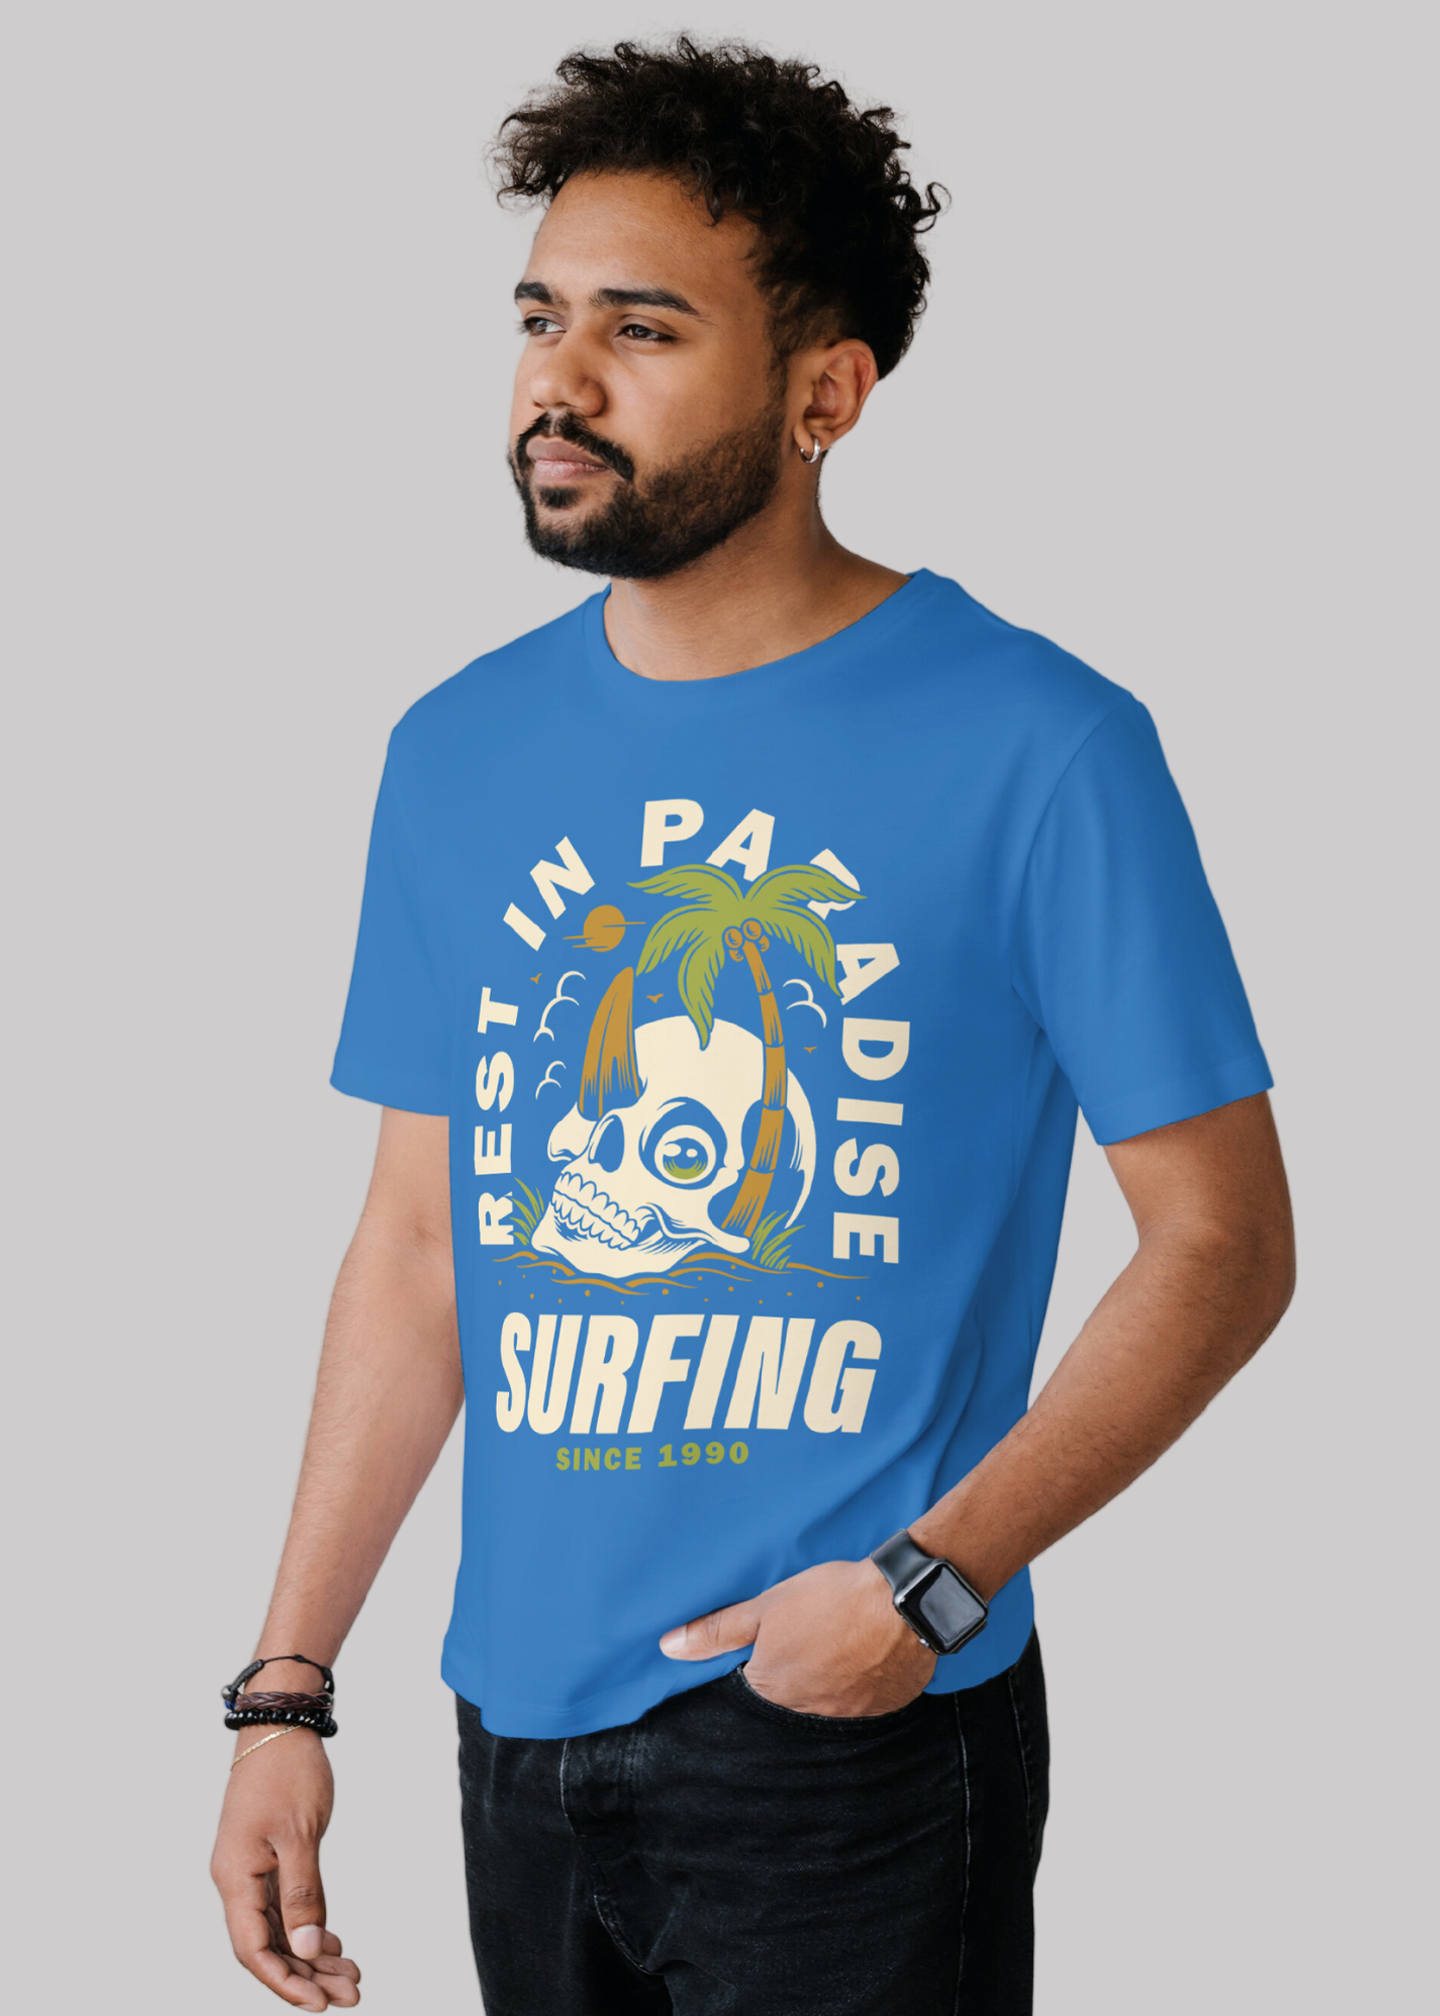 Rest in paradise Printed Half Sleeve Premium Cotton T-shirt For Men